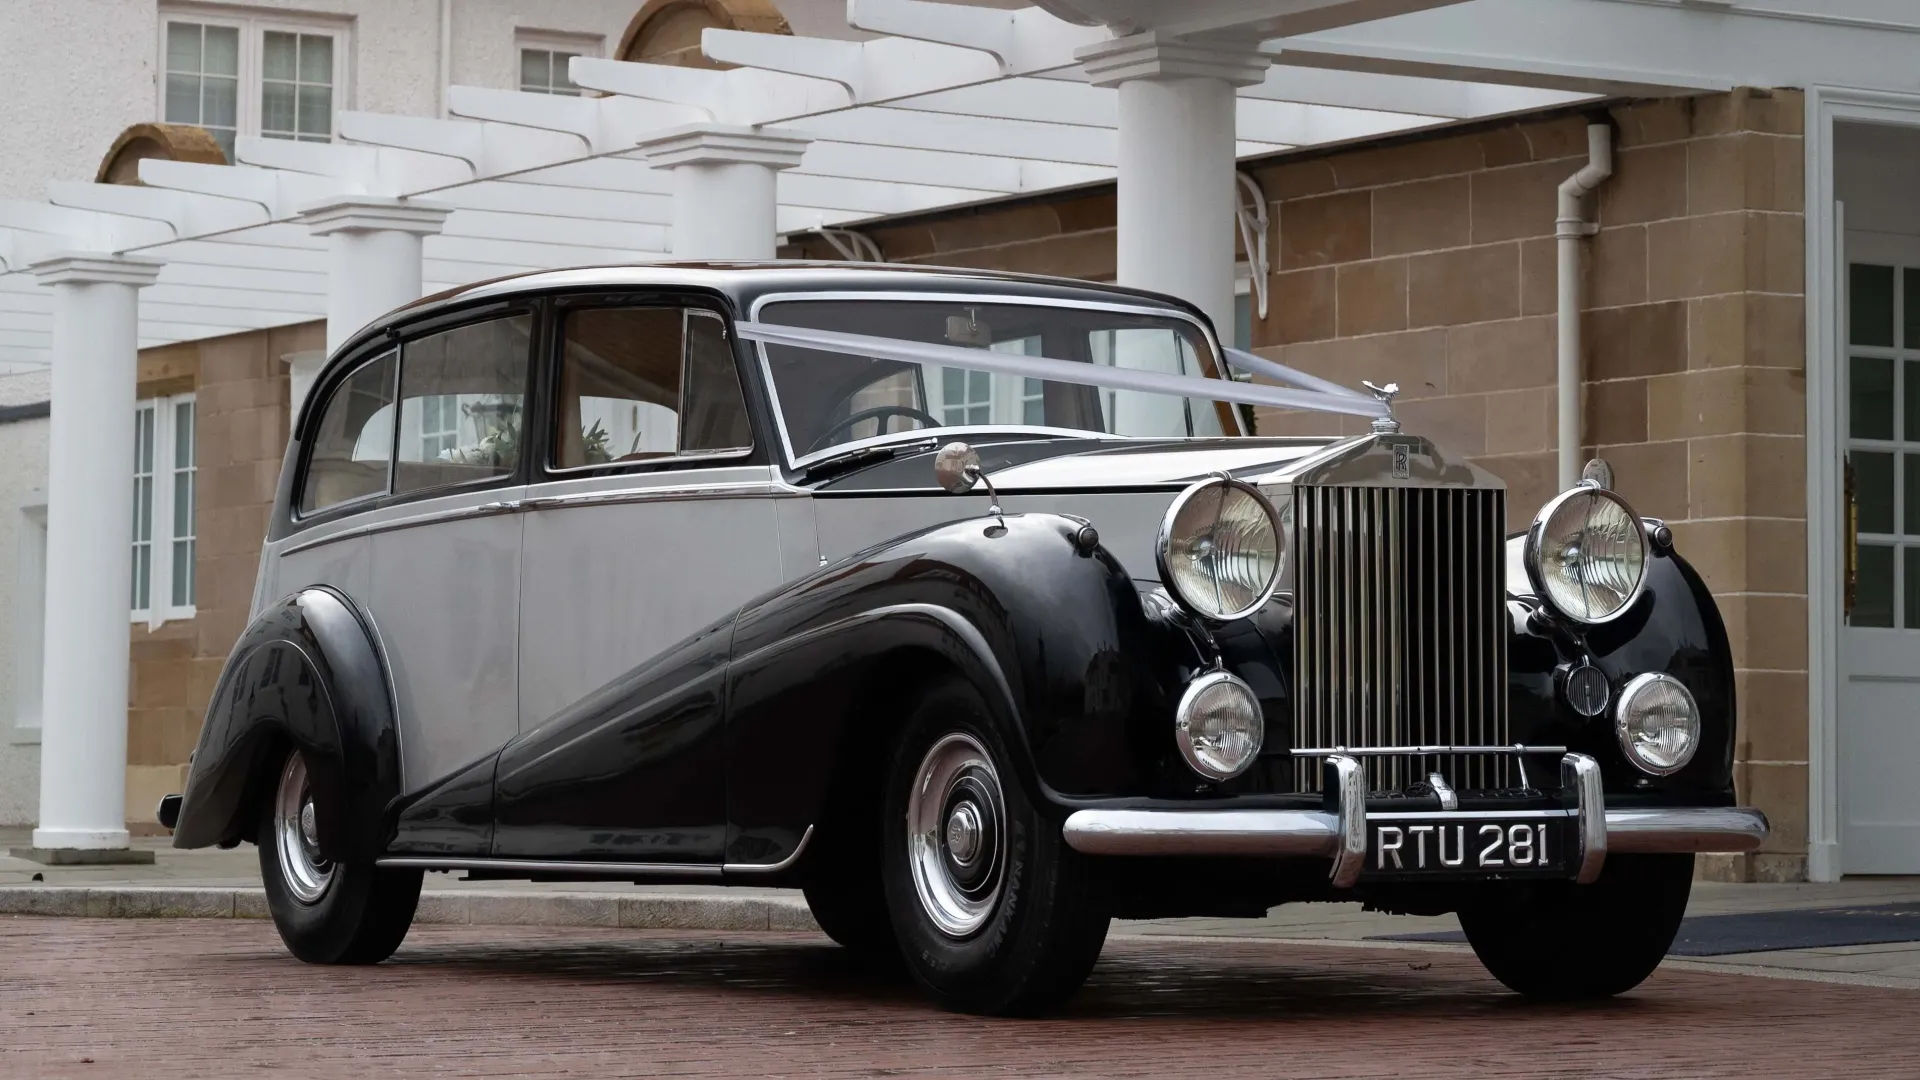 Rolls-Royce silver Wraith LWB with silver ribbons in front of wedding venue